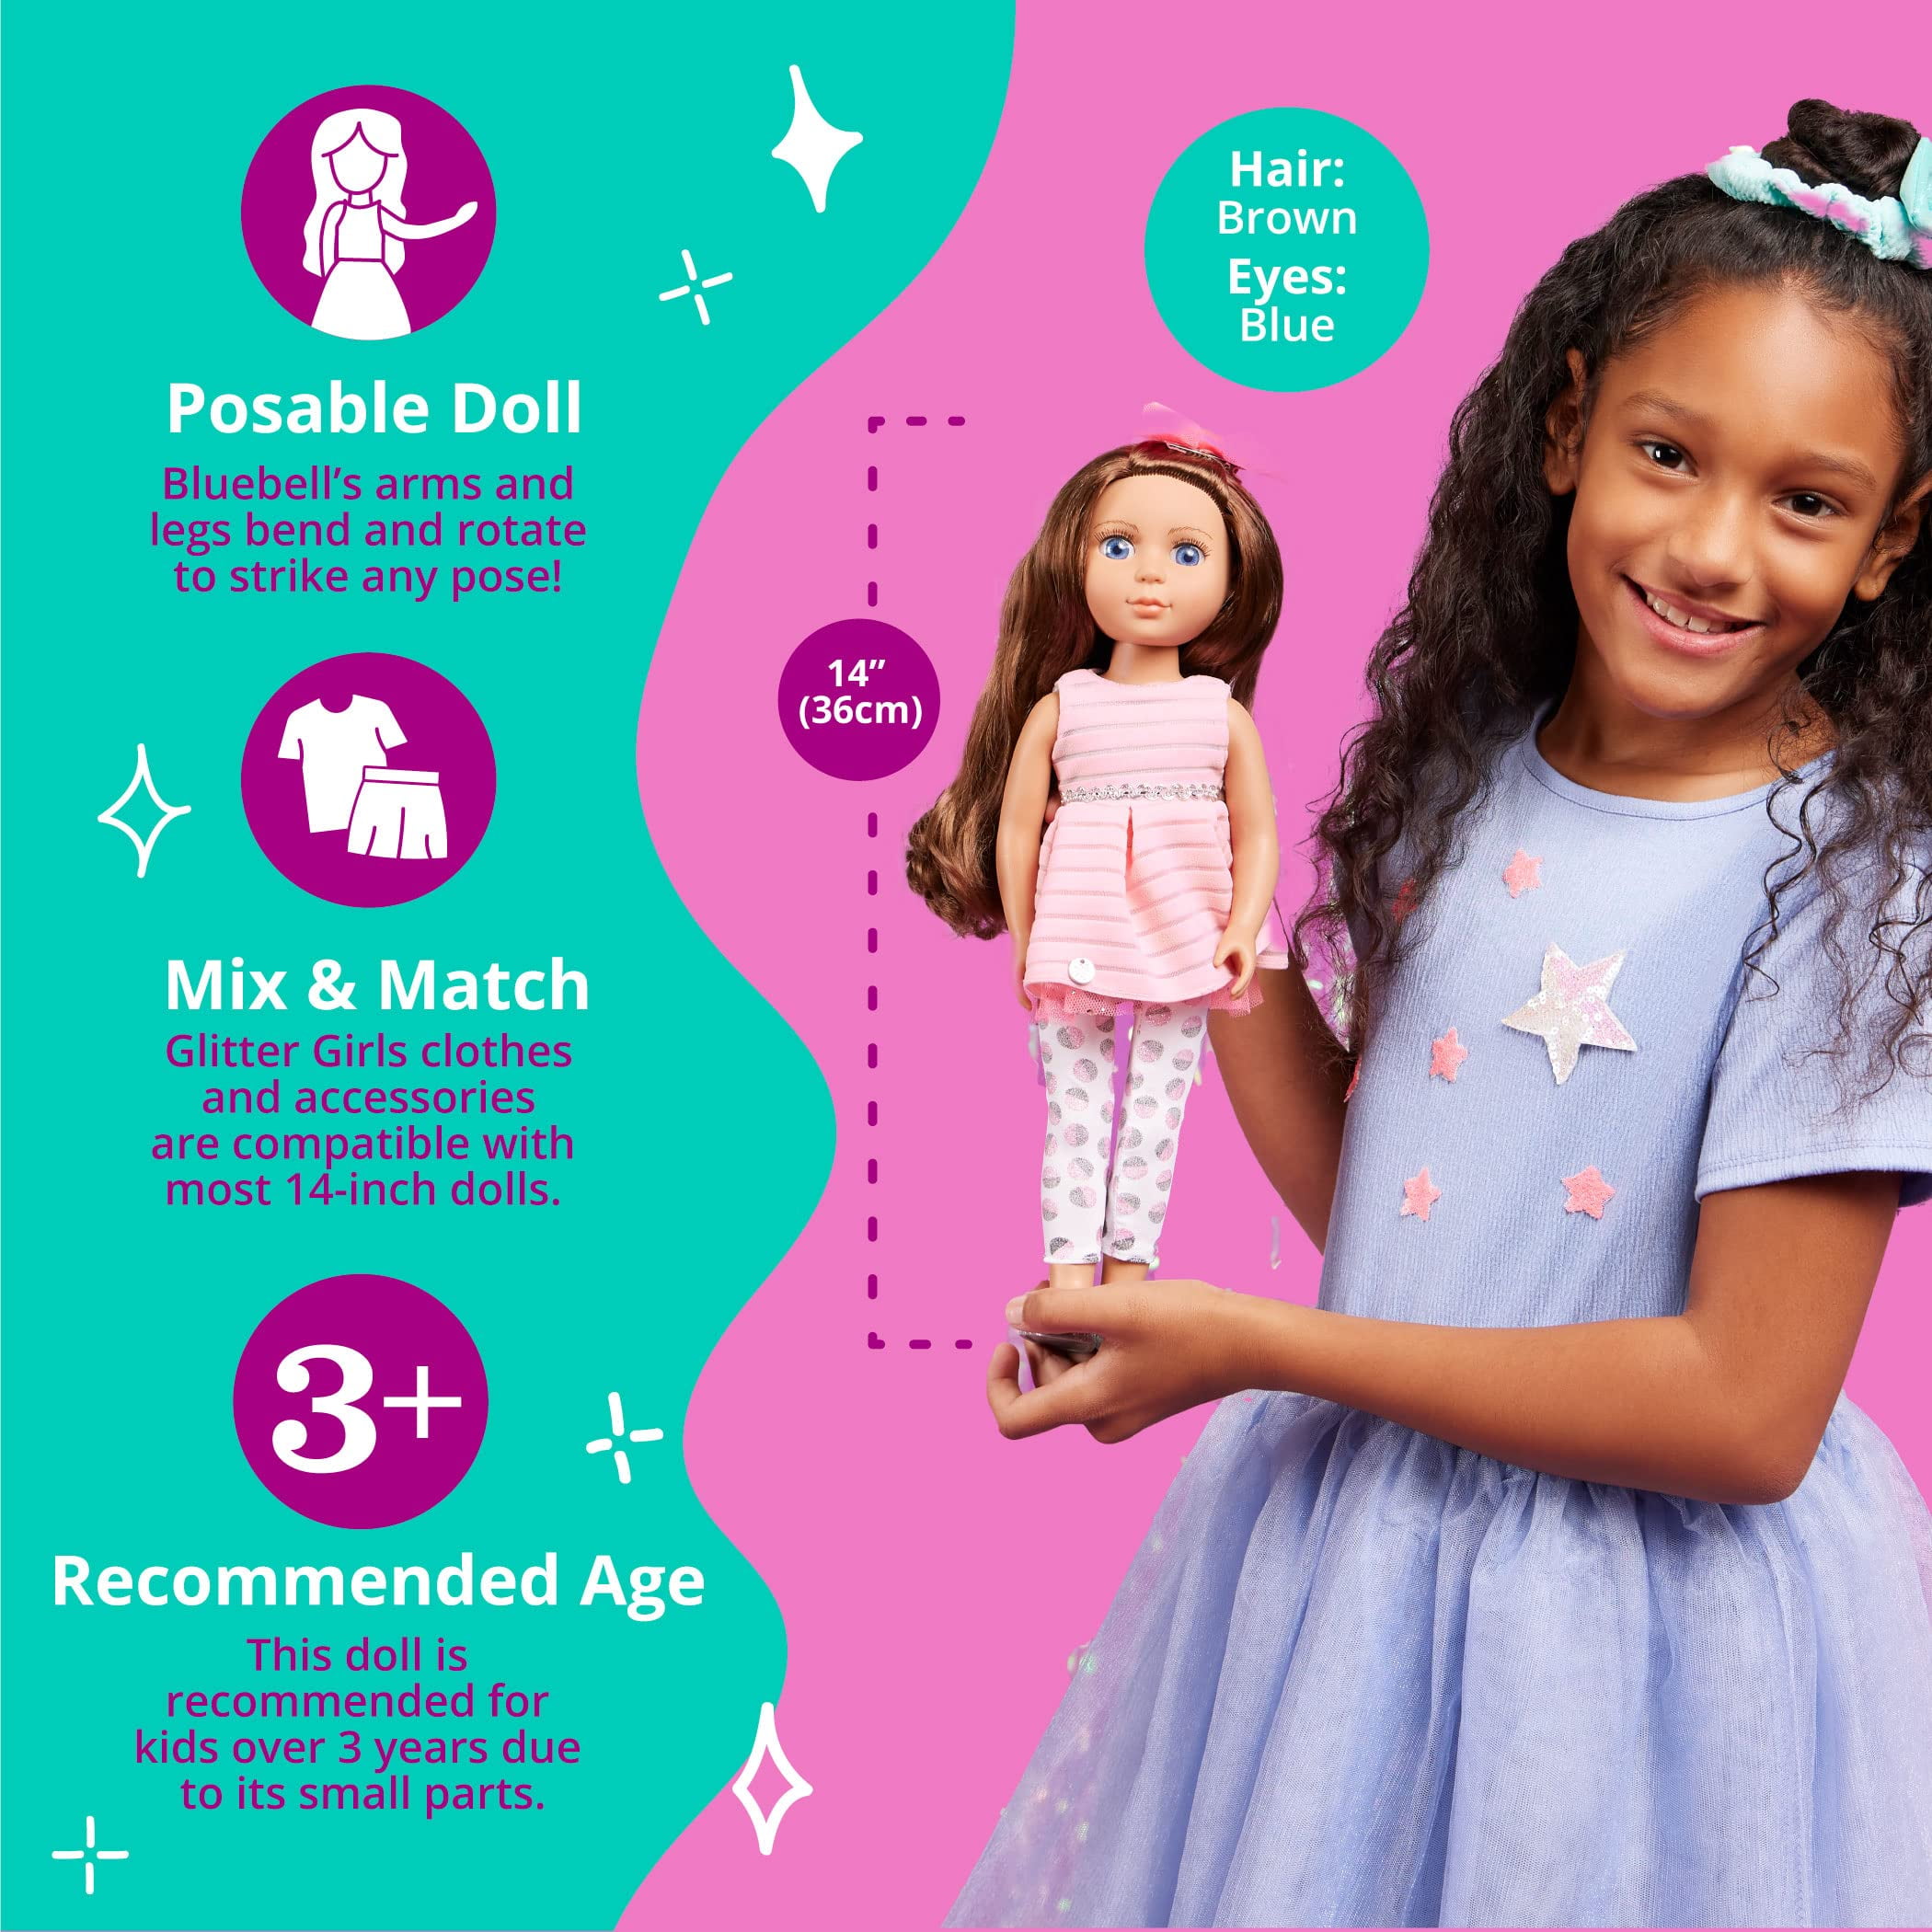 Battat Glitter Girls 14 Doll Kika - Brown Hair, Blue Eyes, Ice Cream  Outfit & Accessories - Ages 3+, Pink